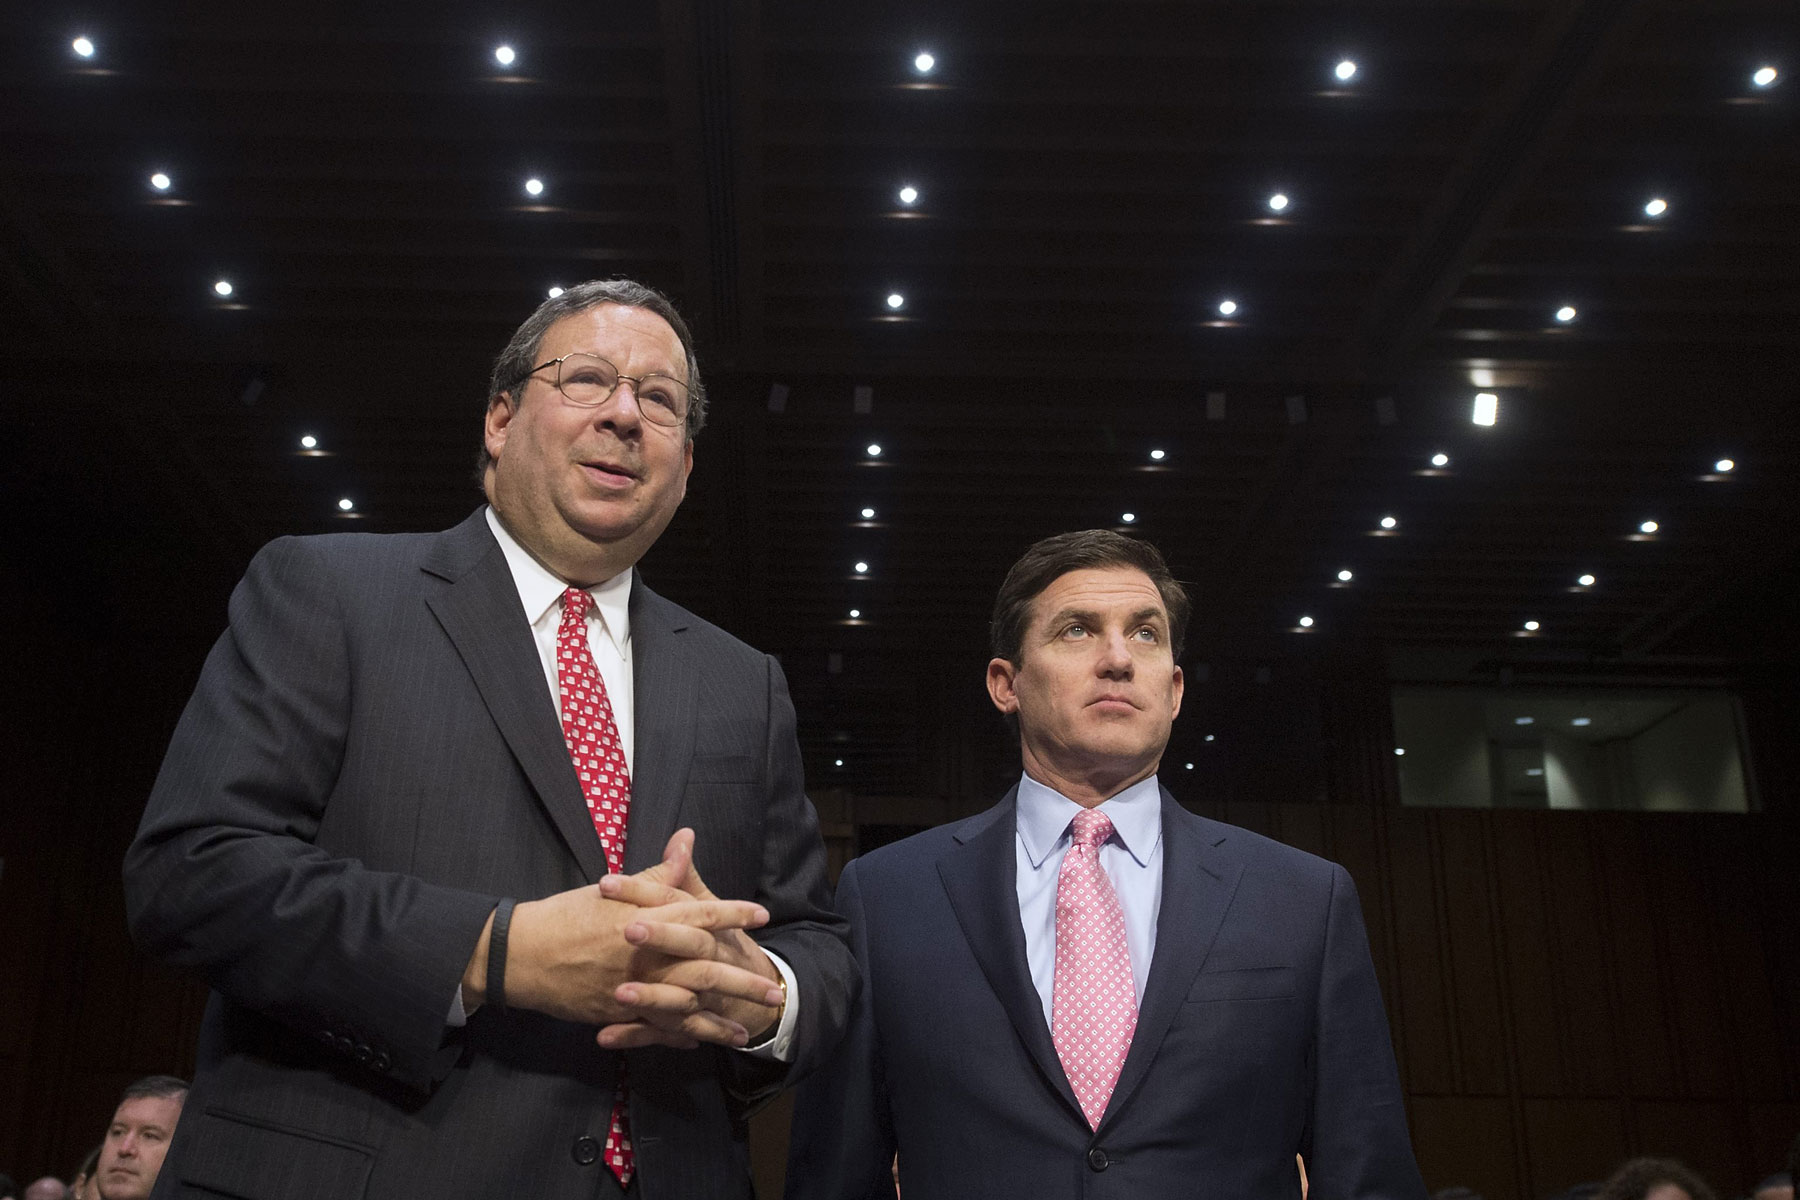 From left: David Cohen, executive vice president of the Comcast Corporation, speaks with Arthur Minson Jr., executive vice president and CFO of the Time Warner Cable Inc., before the start of a Senate Judiciary Committee hearing on Capitol Hill in Washington, April 9, 2014. (Michael Reynolds—EPA)